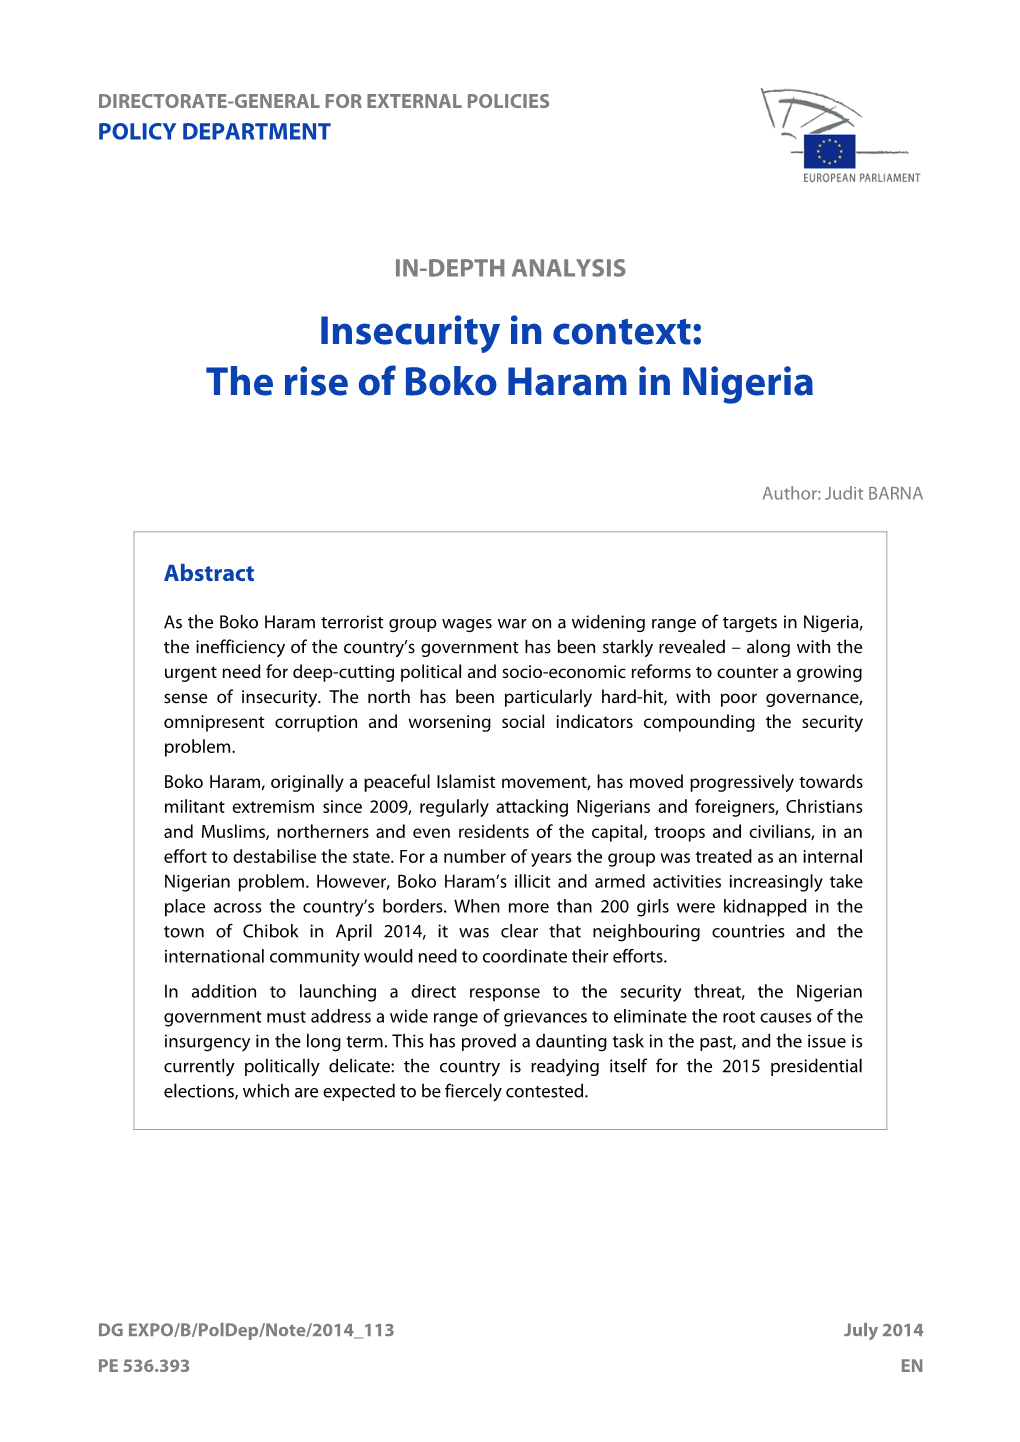 Insecurity in Context: the Rise of Boko Haram in Nigeria